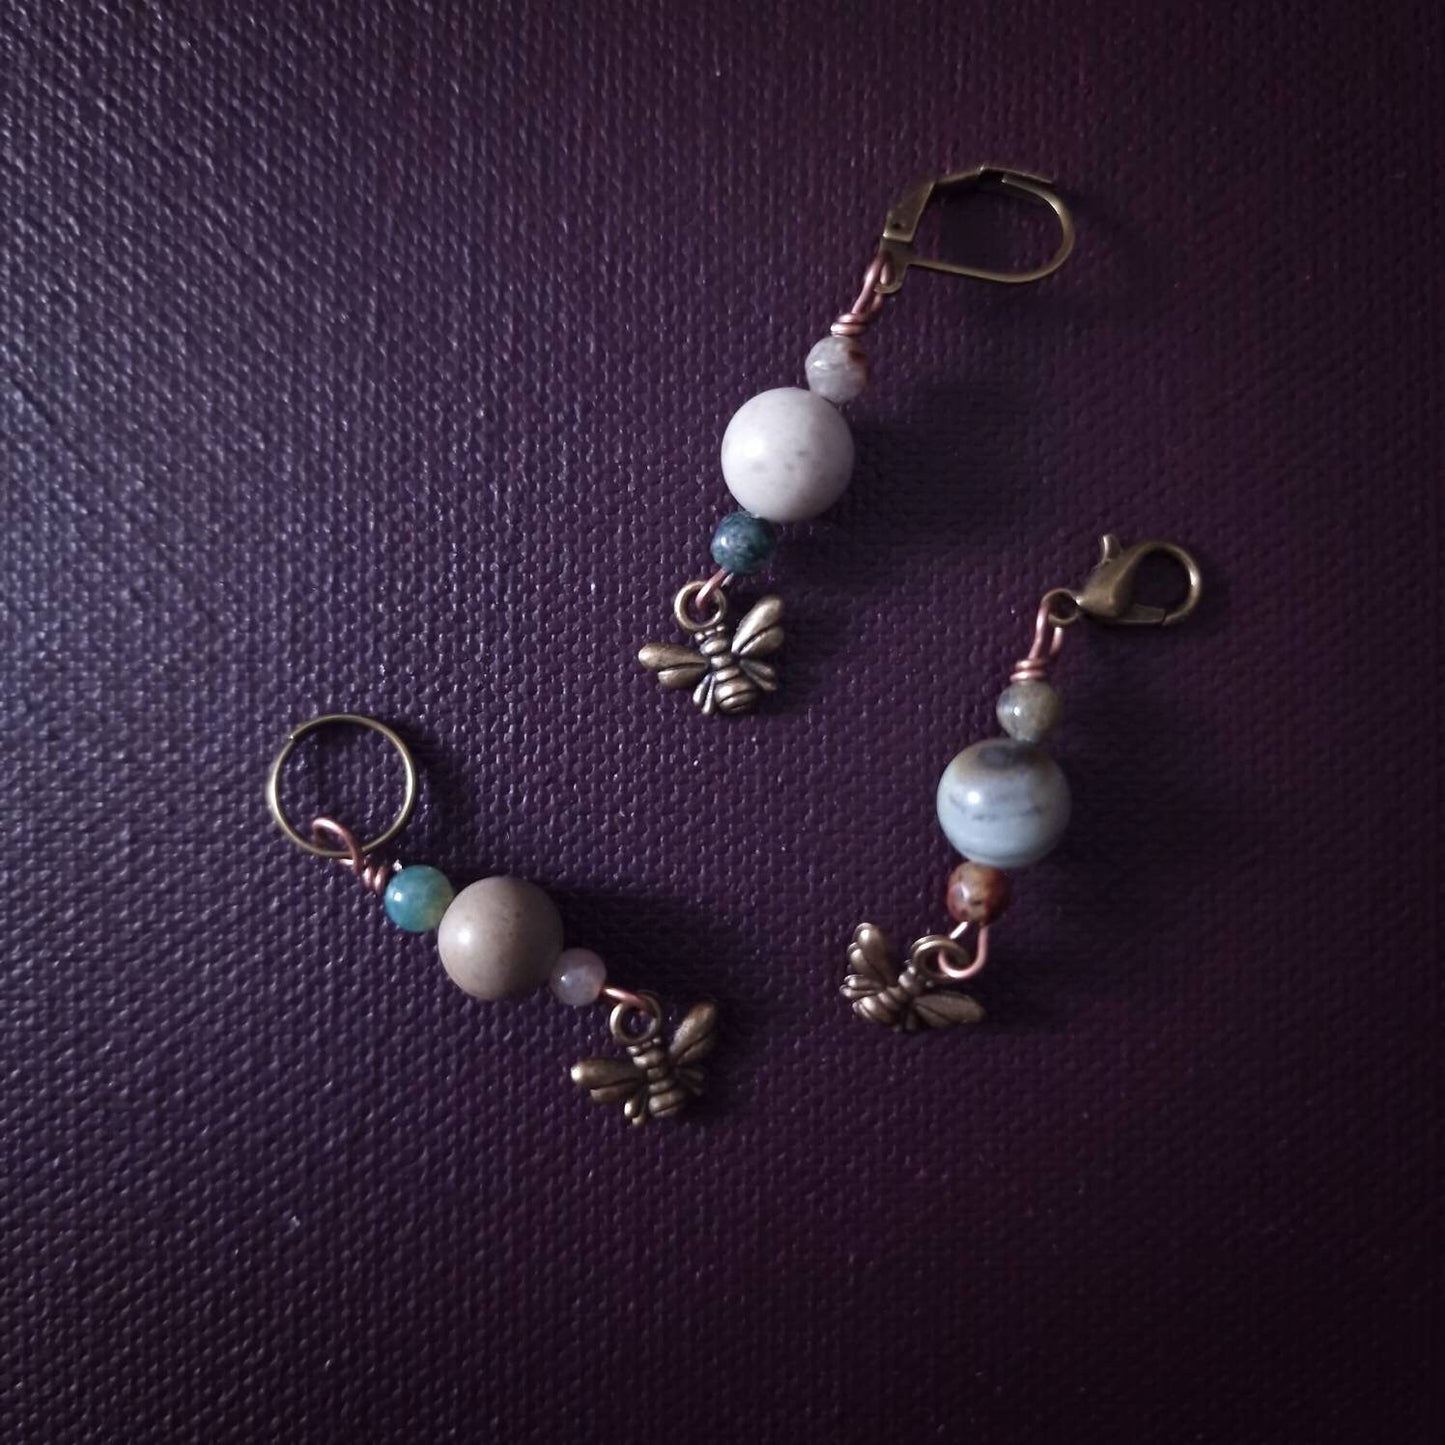 Stitch marker ~ Bees Dance ~ Knitting notions, progress markers, progress keepers, crochet notions, gift for knitter